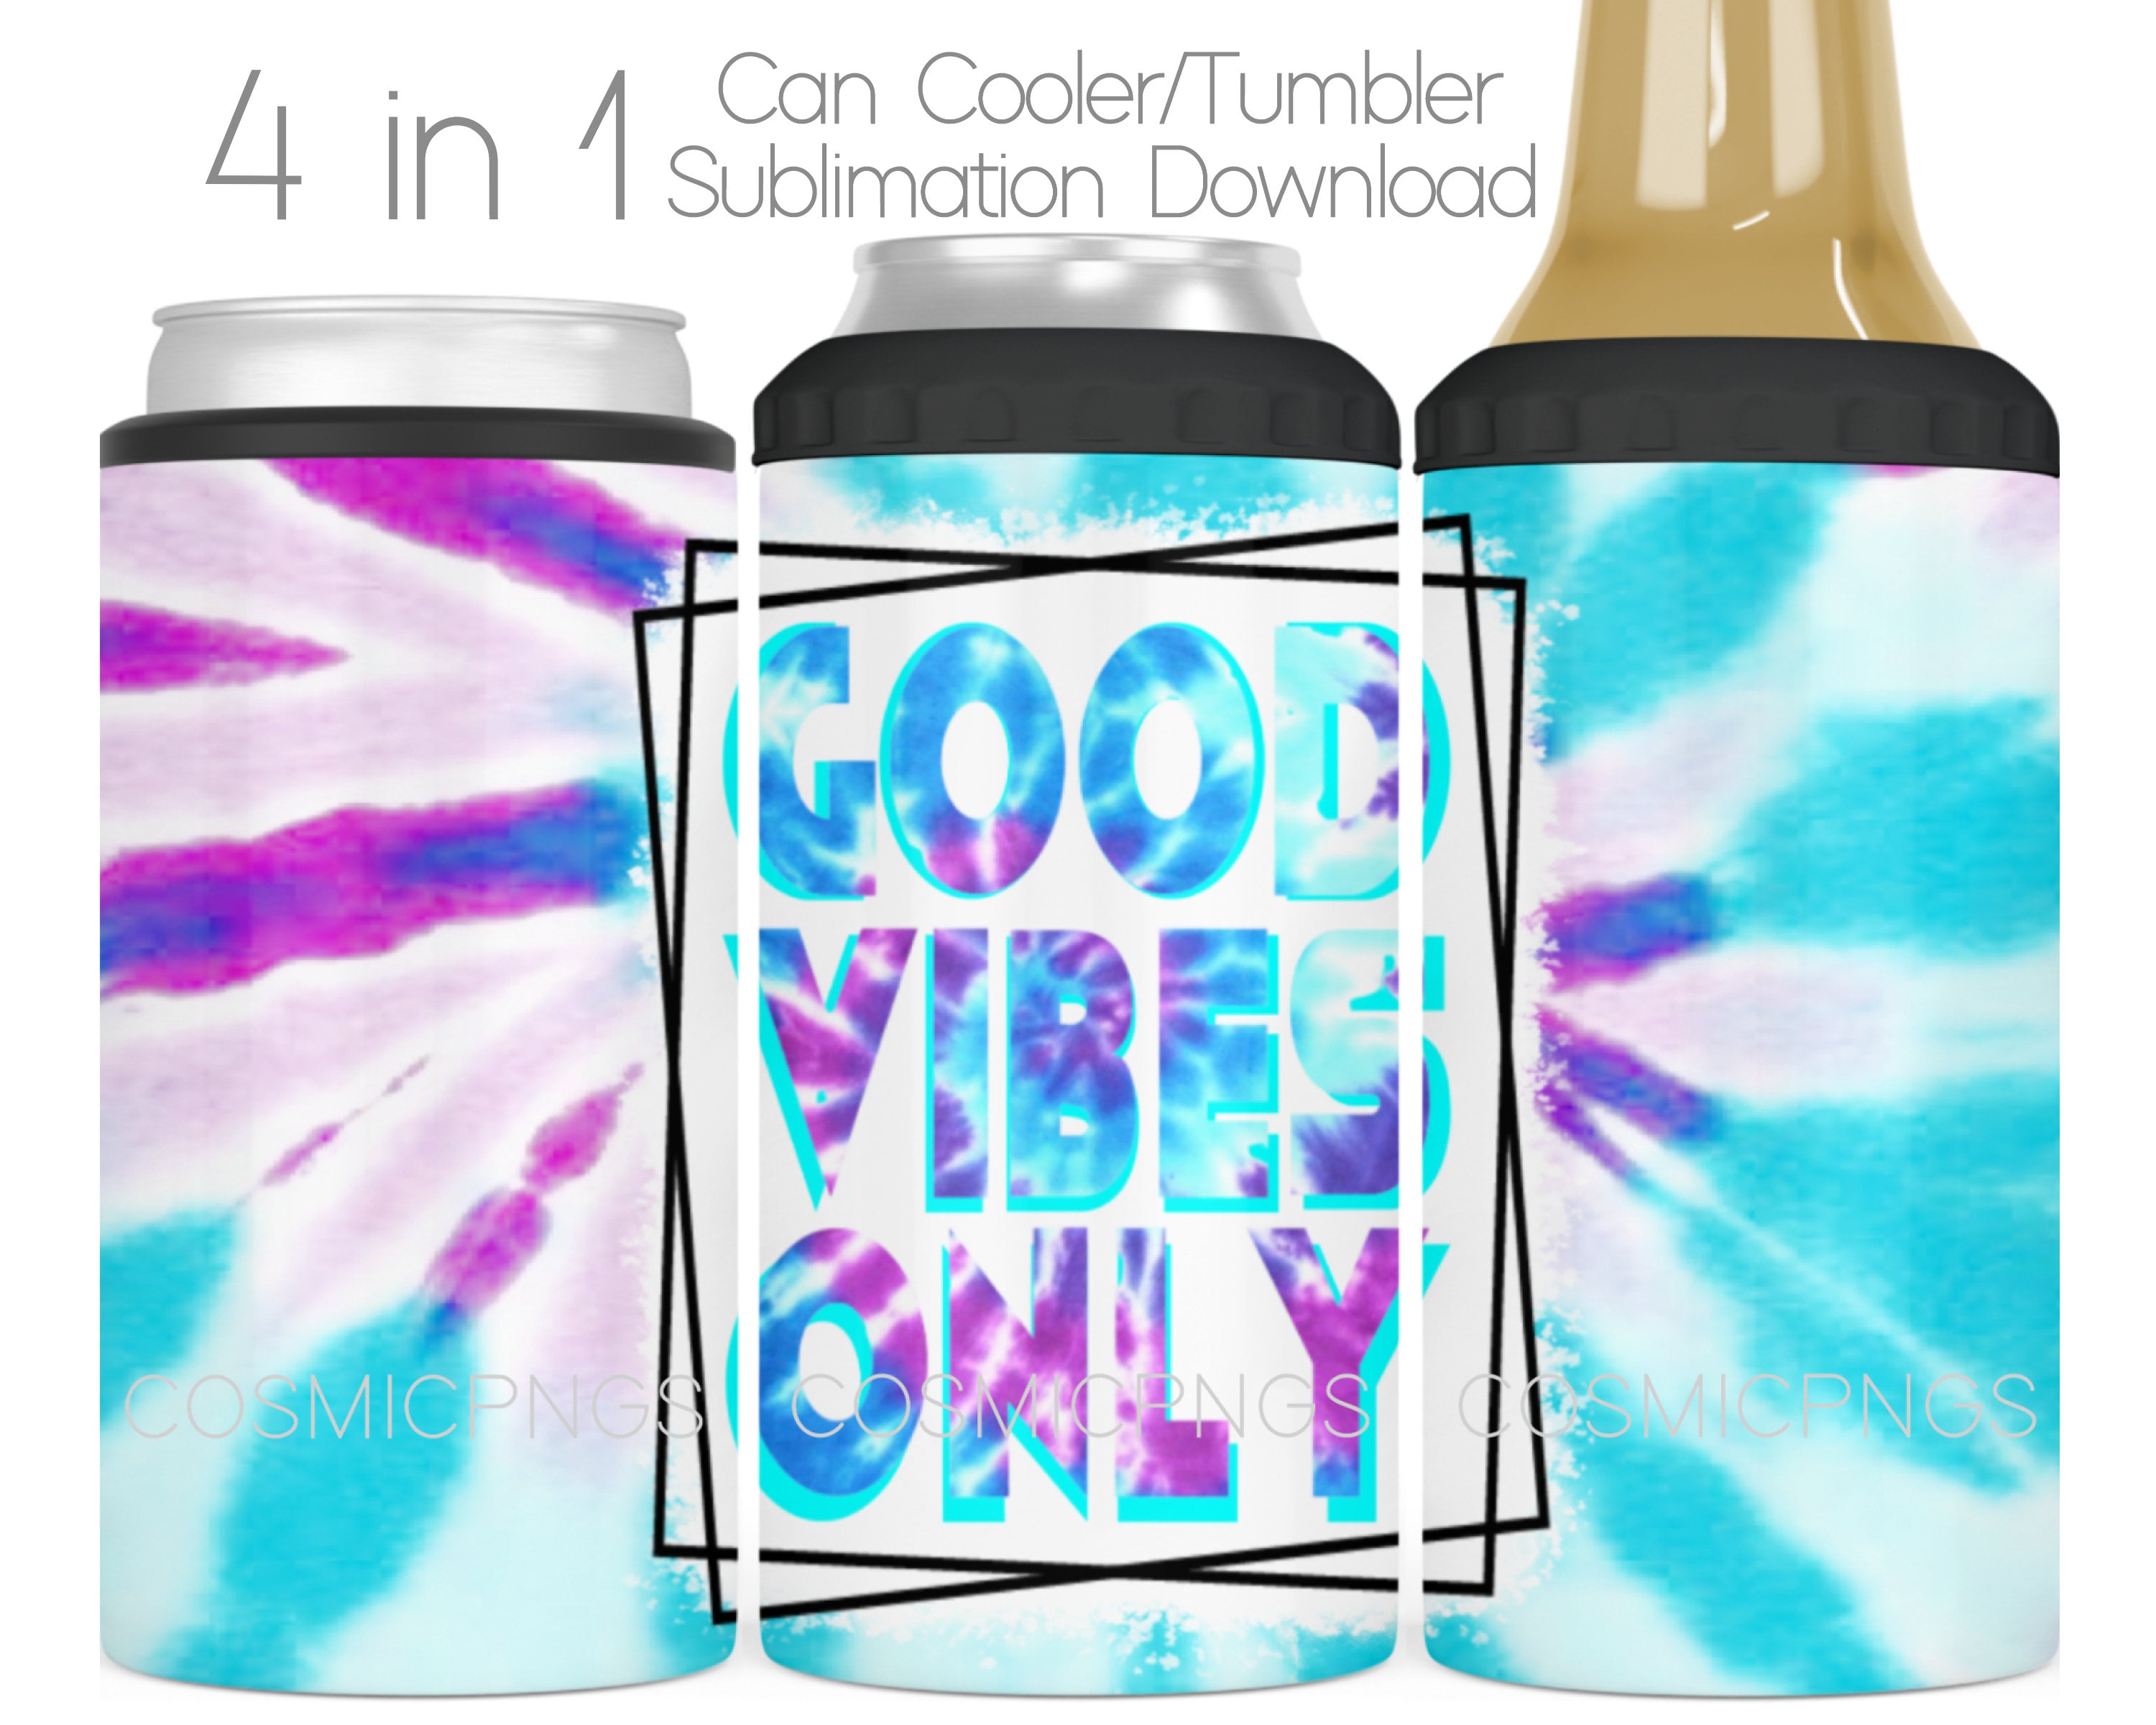 Summer 4 in 1 Can Cooler Sublimation Wrap Design PNG Good Vibes Only 4 in 1  Cooler Tumbler Cup Digital Download File 4in1 Full Wrap 